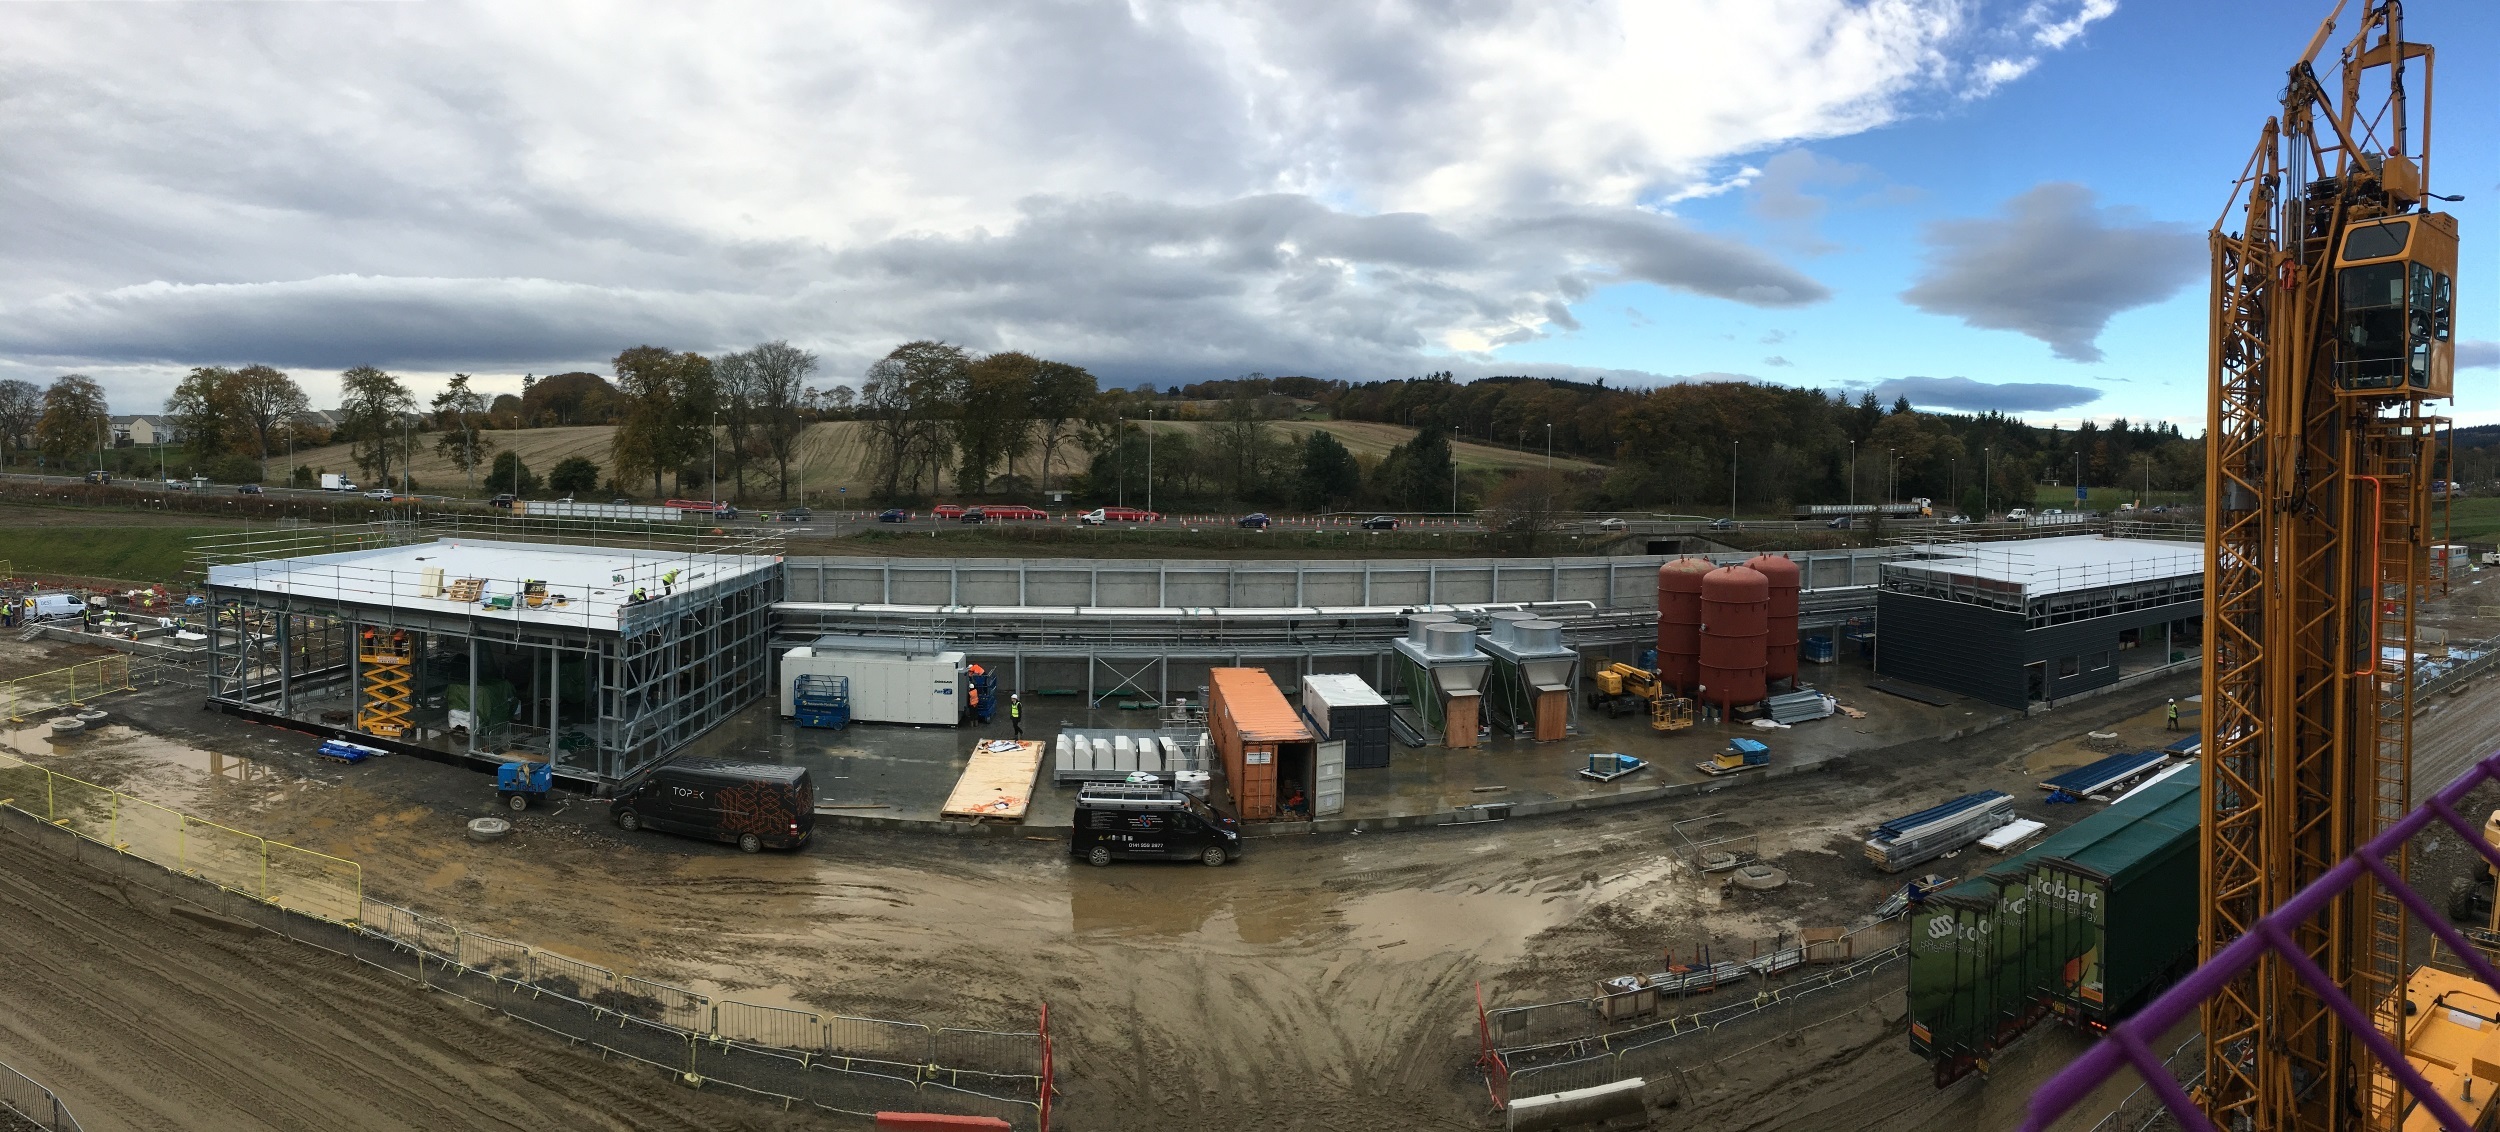 UK’s Largest Hydrogen Cell Installation Arrives at New AECC